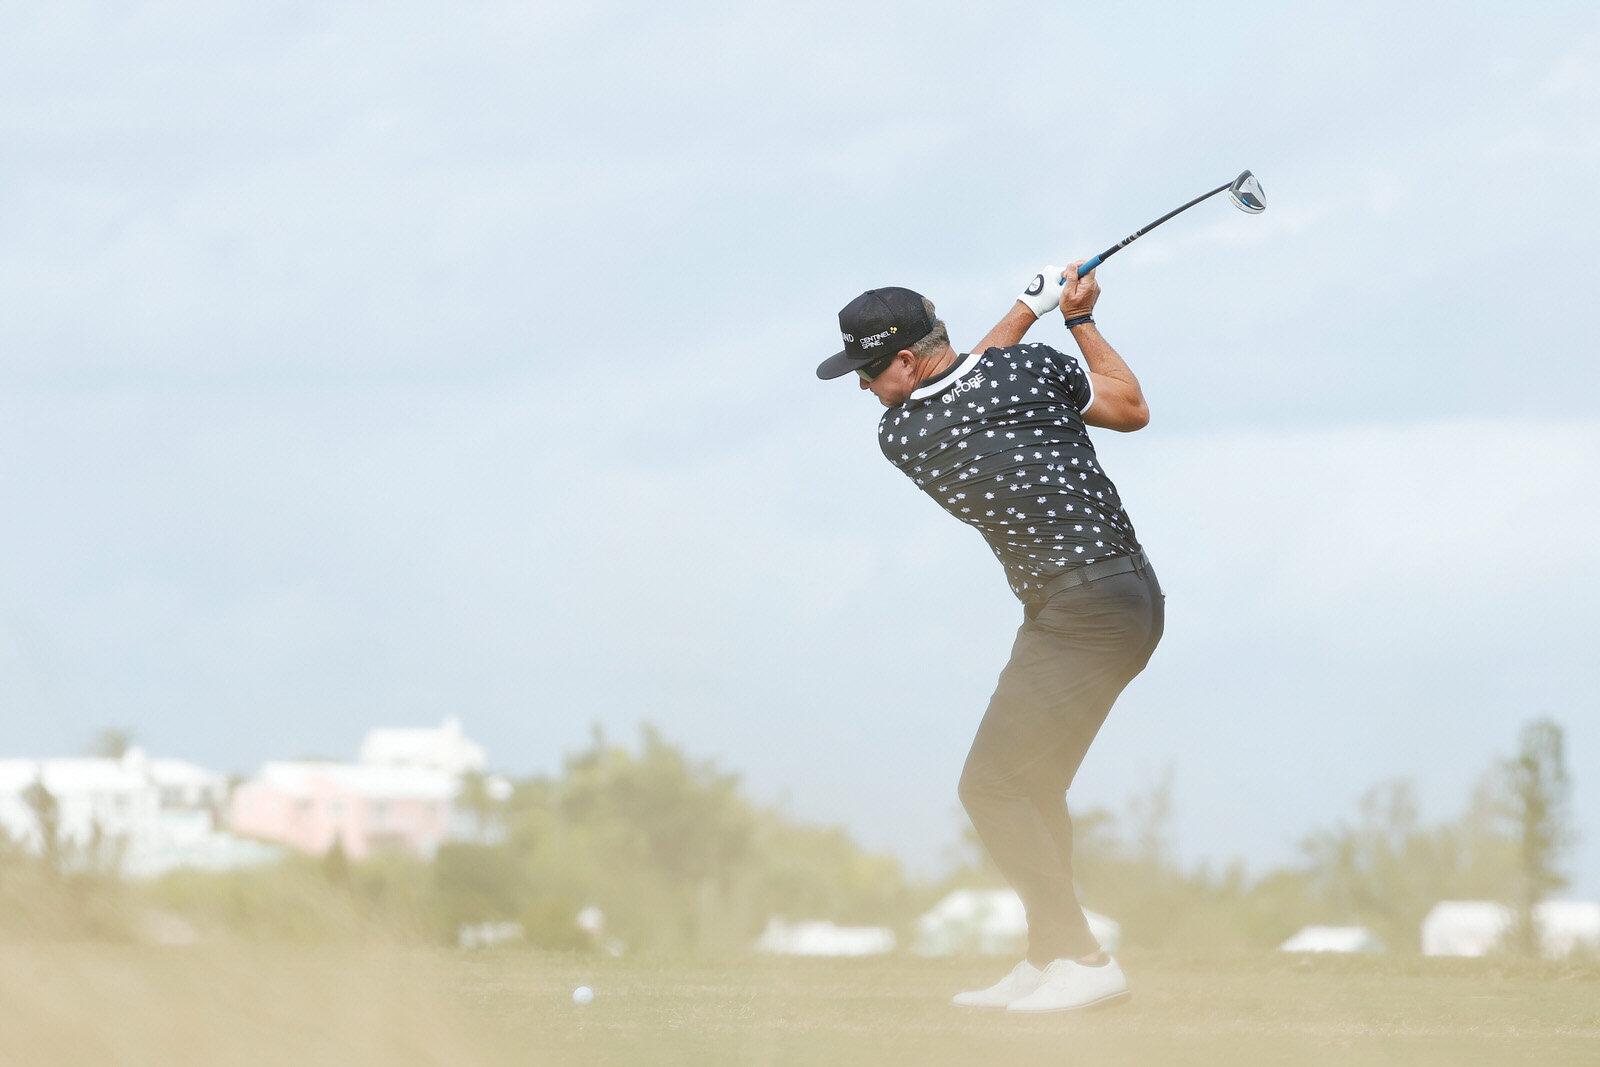  SOUTHAMPTON, BERMUDA - NOVEMBER 01: Brian Gay of the United States plays his shot from the tenth tee during the final round of the Bermuda Championship at Port Royal Golf Course on November 01, 2020 in Southampton, Bermuda. (Photo by Gregory Shamus/